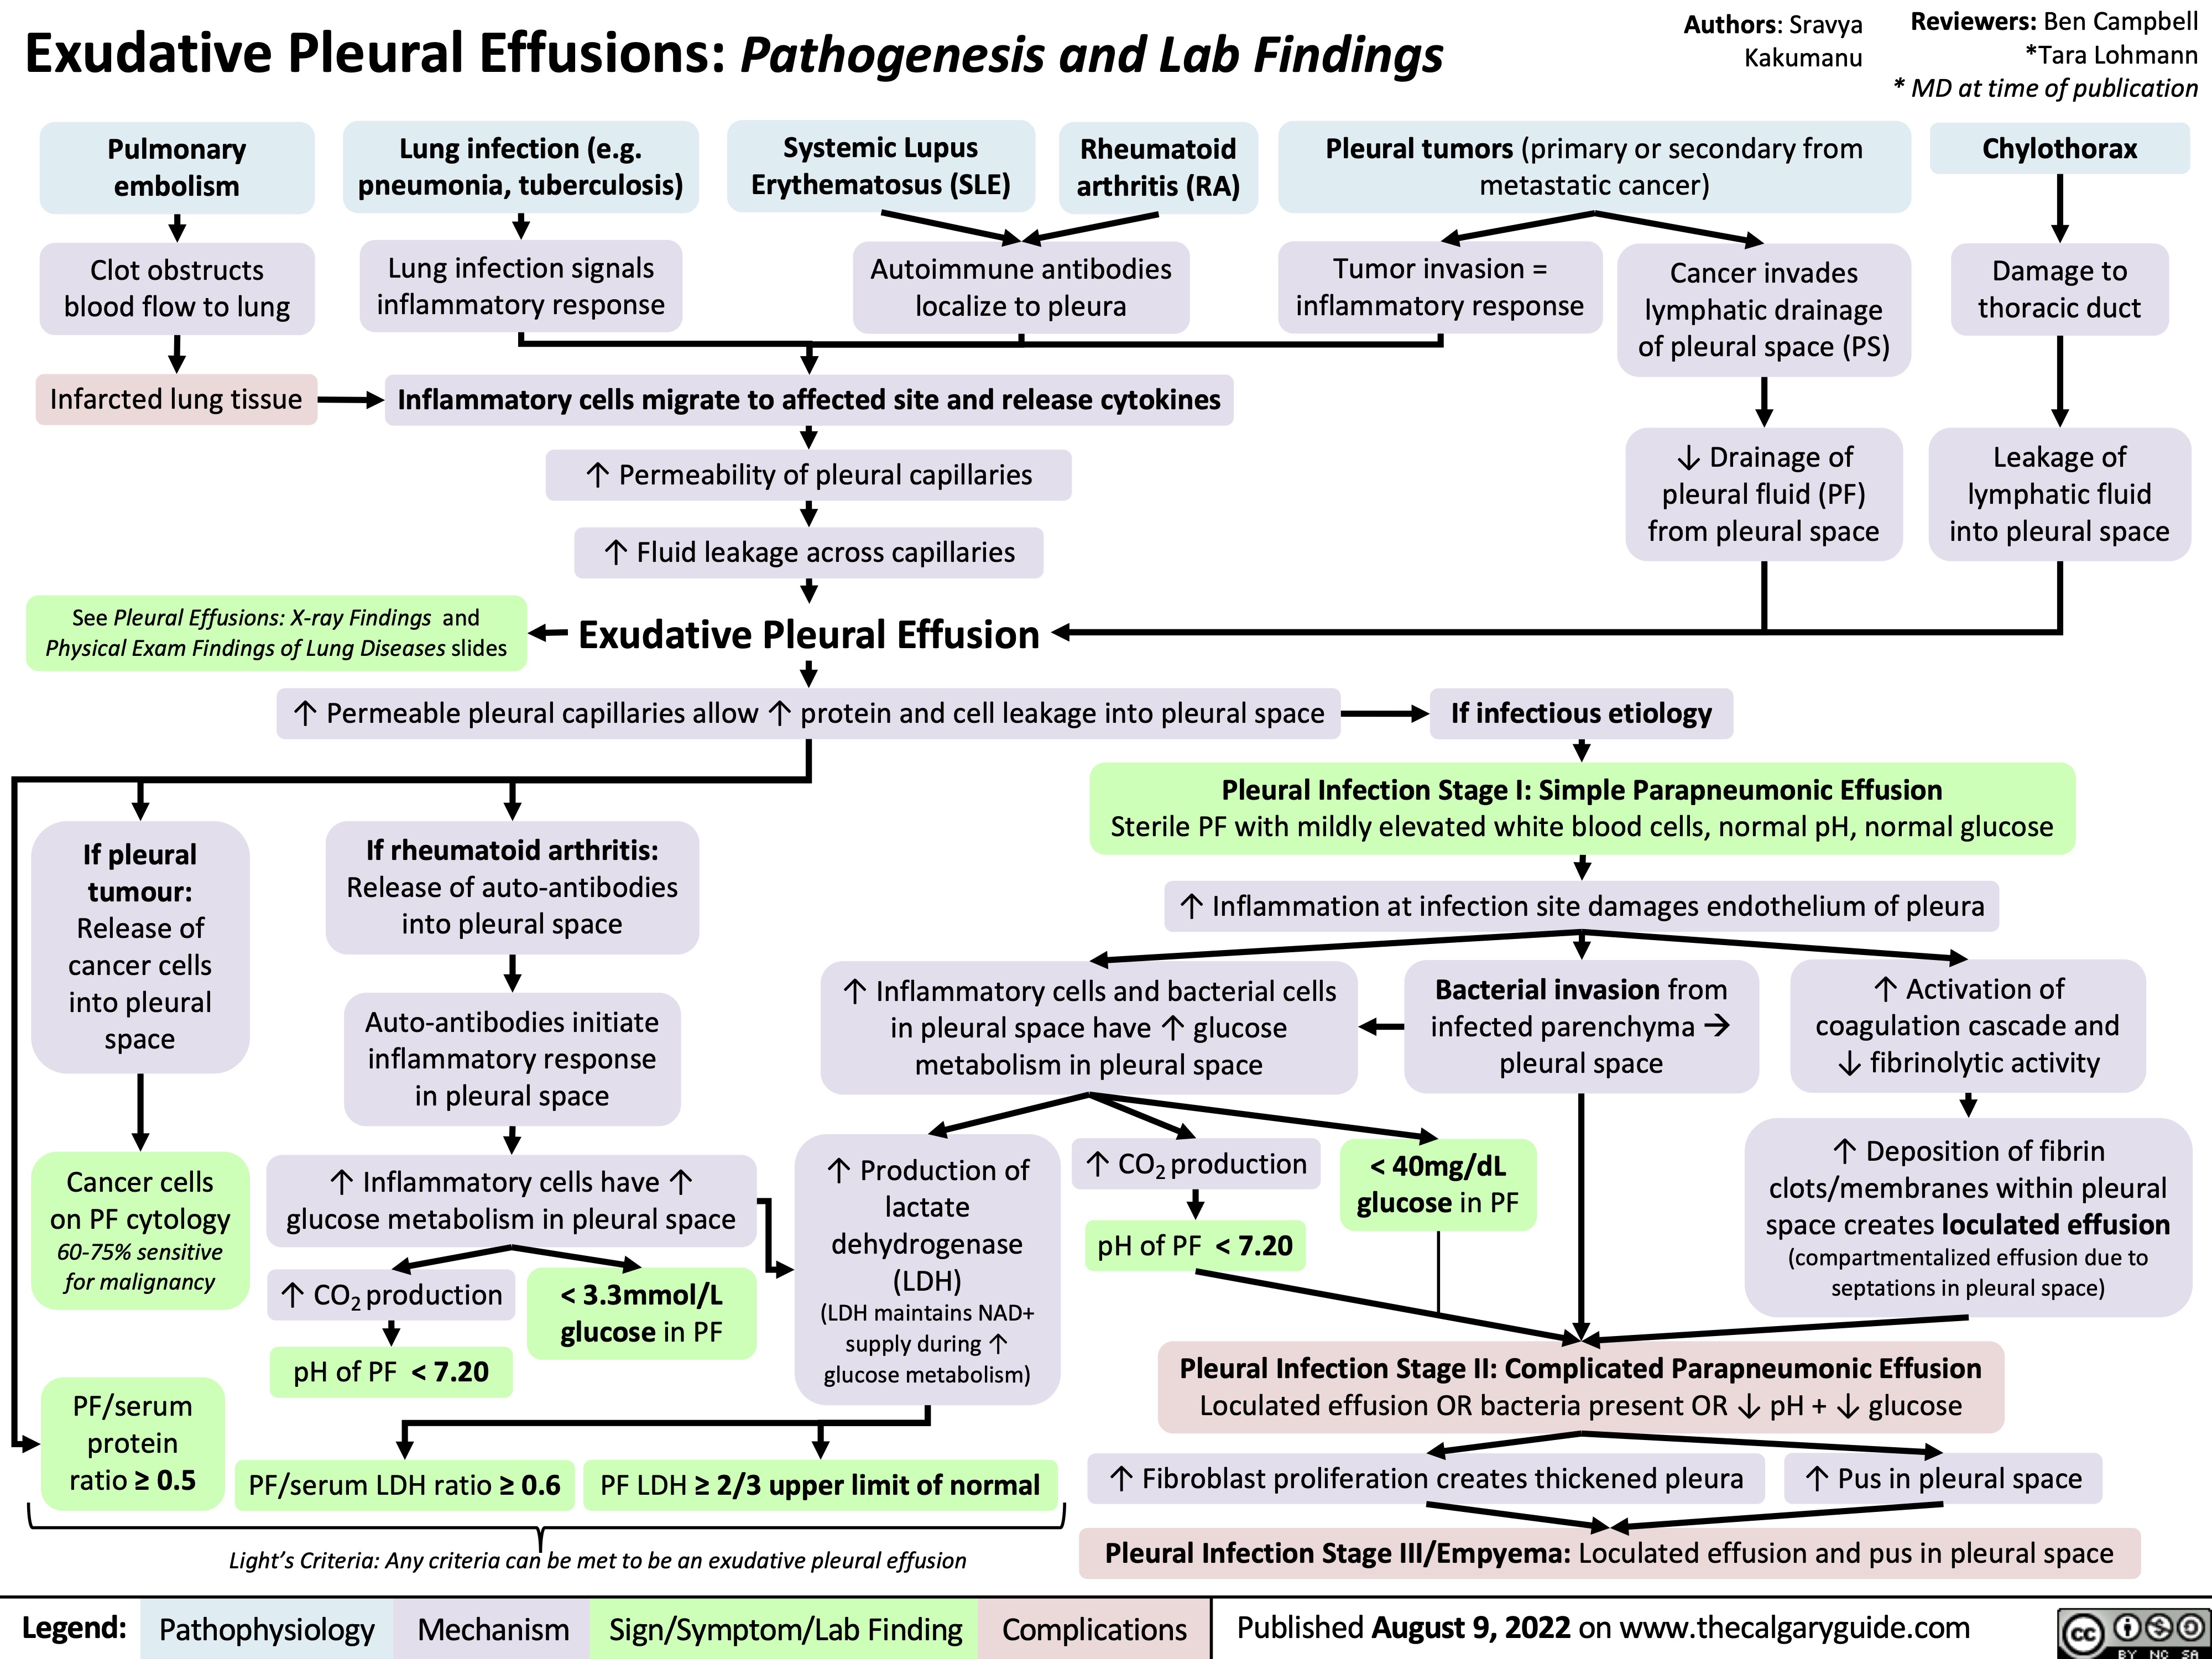 Exudative Pleural Effusions: Pathogenesis and Lab Findings
Authors: Sravya Kakumanu
Reviewers: Ben Campbell *Tara Lohmann * MD at time of publication
Chylothorax
Damage to thoracic duct
Leakage of lymphatic fluid into pleural space
      Pulmonary embolism
Clot obstructs blood flow to lung
Infarcted lung tissue
Lung infection (e.g. pneumonia, tuberculosis)
Lung infection signals inflammatory response
Systemic Lupus Rheumatoid Erythematosus (SLE) arthritis (RA)
Autoimmune antibodies localize to pleura
Pleural tumors (primary or secondary from metastatic cancer)
         Inflammatory cells migrate to affected site and release cytokines
↑ Permeability of pleural capillaries ↑ Fluid leakage across capillaries
Exudative Pleural Effusion
Cancer invades lymphatic drainage of pleural space (PS)
↓ Drainage of pleural fluid (PF) from pleural space
If infectious etiology
Tumor invasion = inflammatory response
            See Pleural Effusions: X-ray Findings and Physical Exam Findings of Lung Diseases slides
  ↑ Permeable pleural capillaries allow ↑ protein and cell leakage into pleural space
   If pleural tumour: Release of cancer cells into pleural space
Cancer cells on PF cytology 60-75% sensitive for malignancy
If rheumatoid arthritis:
Release of auto-antibodies into pleural space
Auto-antibodies initiate inflammatory response in pleural space
↑ Inflammatory cells have ↑ glucose metabolism in pleural space
Sterile PF with mildly elevated white blood cells, normal pH, normal glucose ↑ Inflammation at infection site damages endothelium of pleura
Pleural Infection Stage I: Simple Parapneumonic Effusion
        ↑ Inflammatory cells and bacterial cells in pleural space have ↑ glucose metabolism in pleural space
Bacterial invasion from infected parenchymaà pleural space
< 40mg/dL glucose in PF
↑ Activation of coagulation cascade and ↓ fibrinolytic activity
↑ Deposition of fibrin
clots/membranes within pleural
space creates loculated effusion
(compartmentalized effusion due to septations in pleural space)
       ↑ Production of
lactate
dehydrogenase
(LDH)
(LDH maintains NAD+ supply during ↑ glucose metabolism)
↑ CO2 production pH of PF < 7.20
      ↑ CO2 production pH of PF < 7.20
< 3.3mmol/L glucose in PF
Pleural Infection Stage II: Complicated Parapneumonic Effusion
Loculated effusion OR bacteria present OR ↓ pH + ↓ glucose
↑ Fibroblast proliferation creates thickened pleura ↑ Pus in pleural space Pleural Infection Stage III/Empyema: Loculated effusion and pus in pleural space
    PF/serum protein ratio ≥ 0.5
PF/serum LDH ratio ≥ 0.6
Light’s Criteria: Any criteria can be met to be an exudative pleural effusion
      PF LDH ≥ 2/3 upper limit of normal
    
Legend:
Pathophysiology
Mechanism
Sign/Symptom/Lab Finding
Complications
Published August 9, 2022 on www.thecalgaryguide.com
 